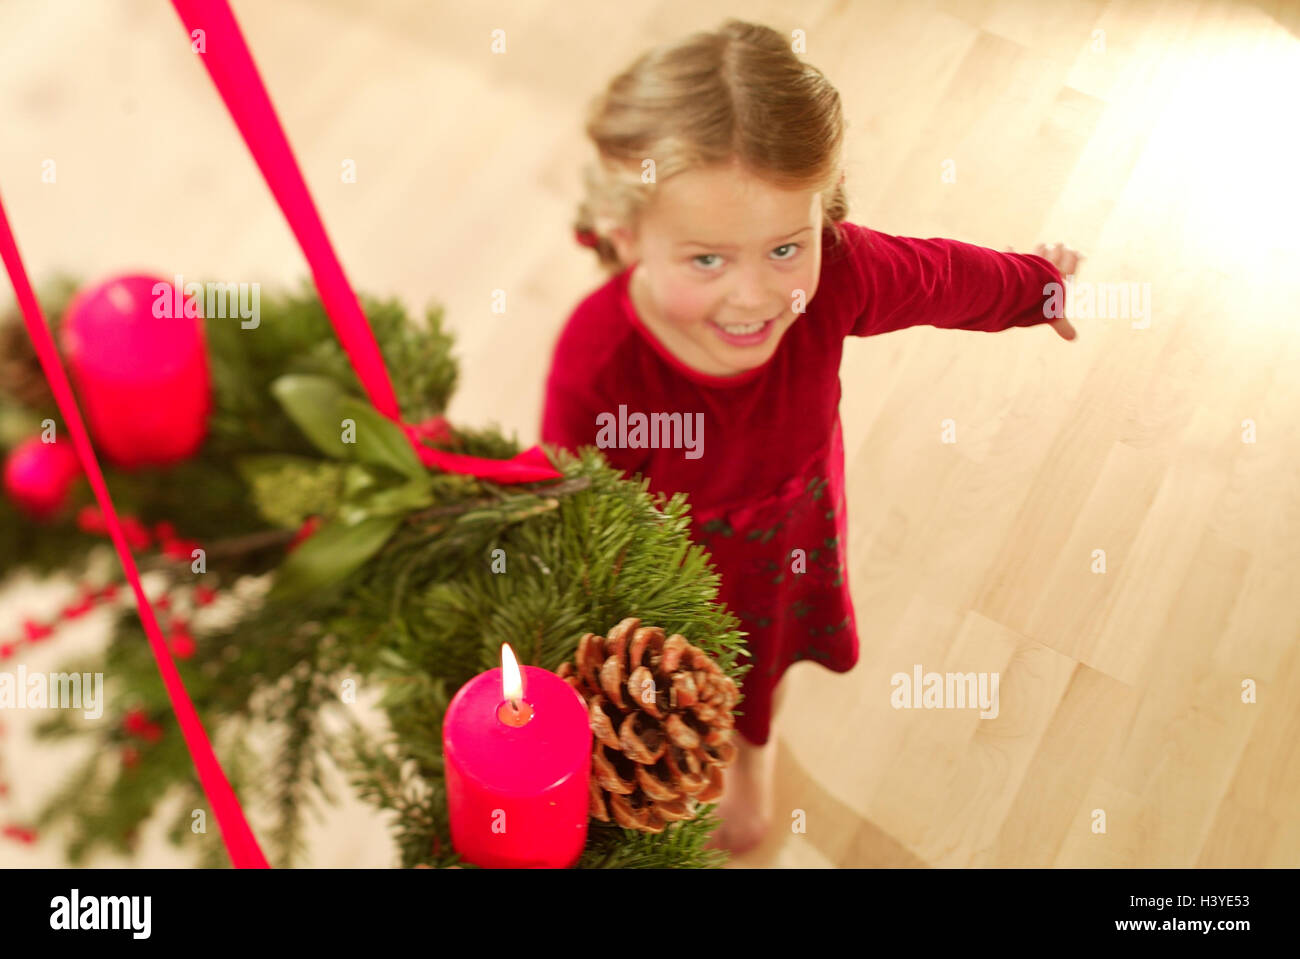 Girls, gesture, view up, Advent wreath, hang, from above, inside, at home, child, 6 years, Christmas, yule tide, for Christmas, Advent season, candle, burn, prejoy, joy, expectation, expectantly, happily, indicate, testify, point, smile, Advent candle Stock Photo